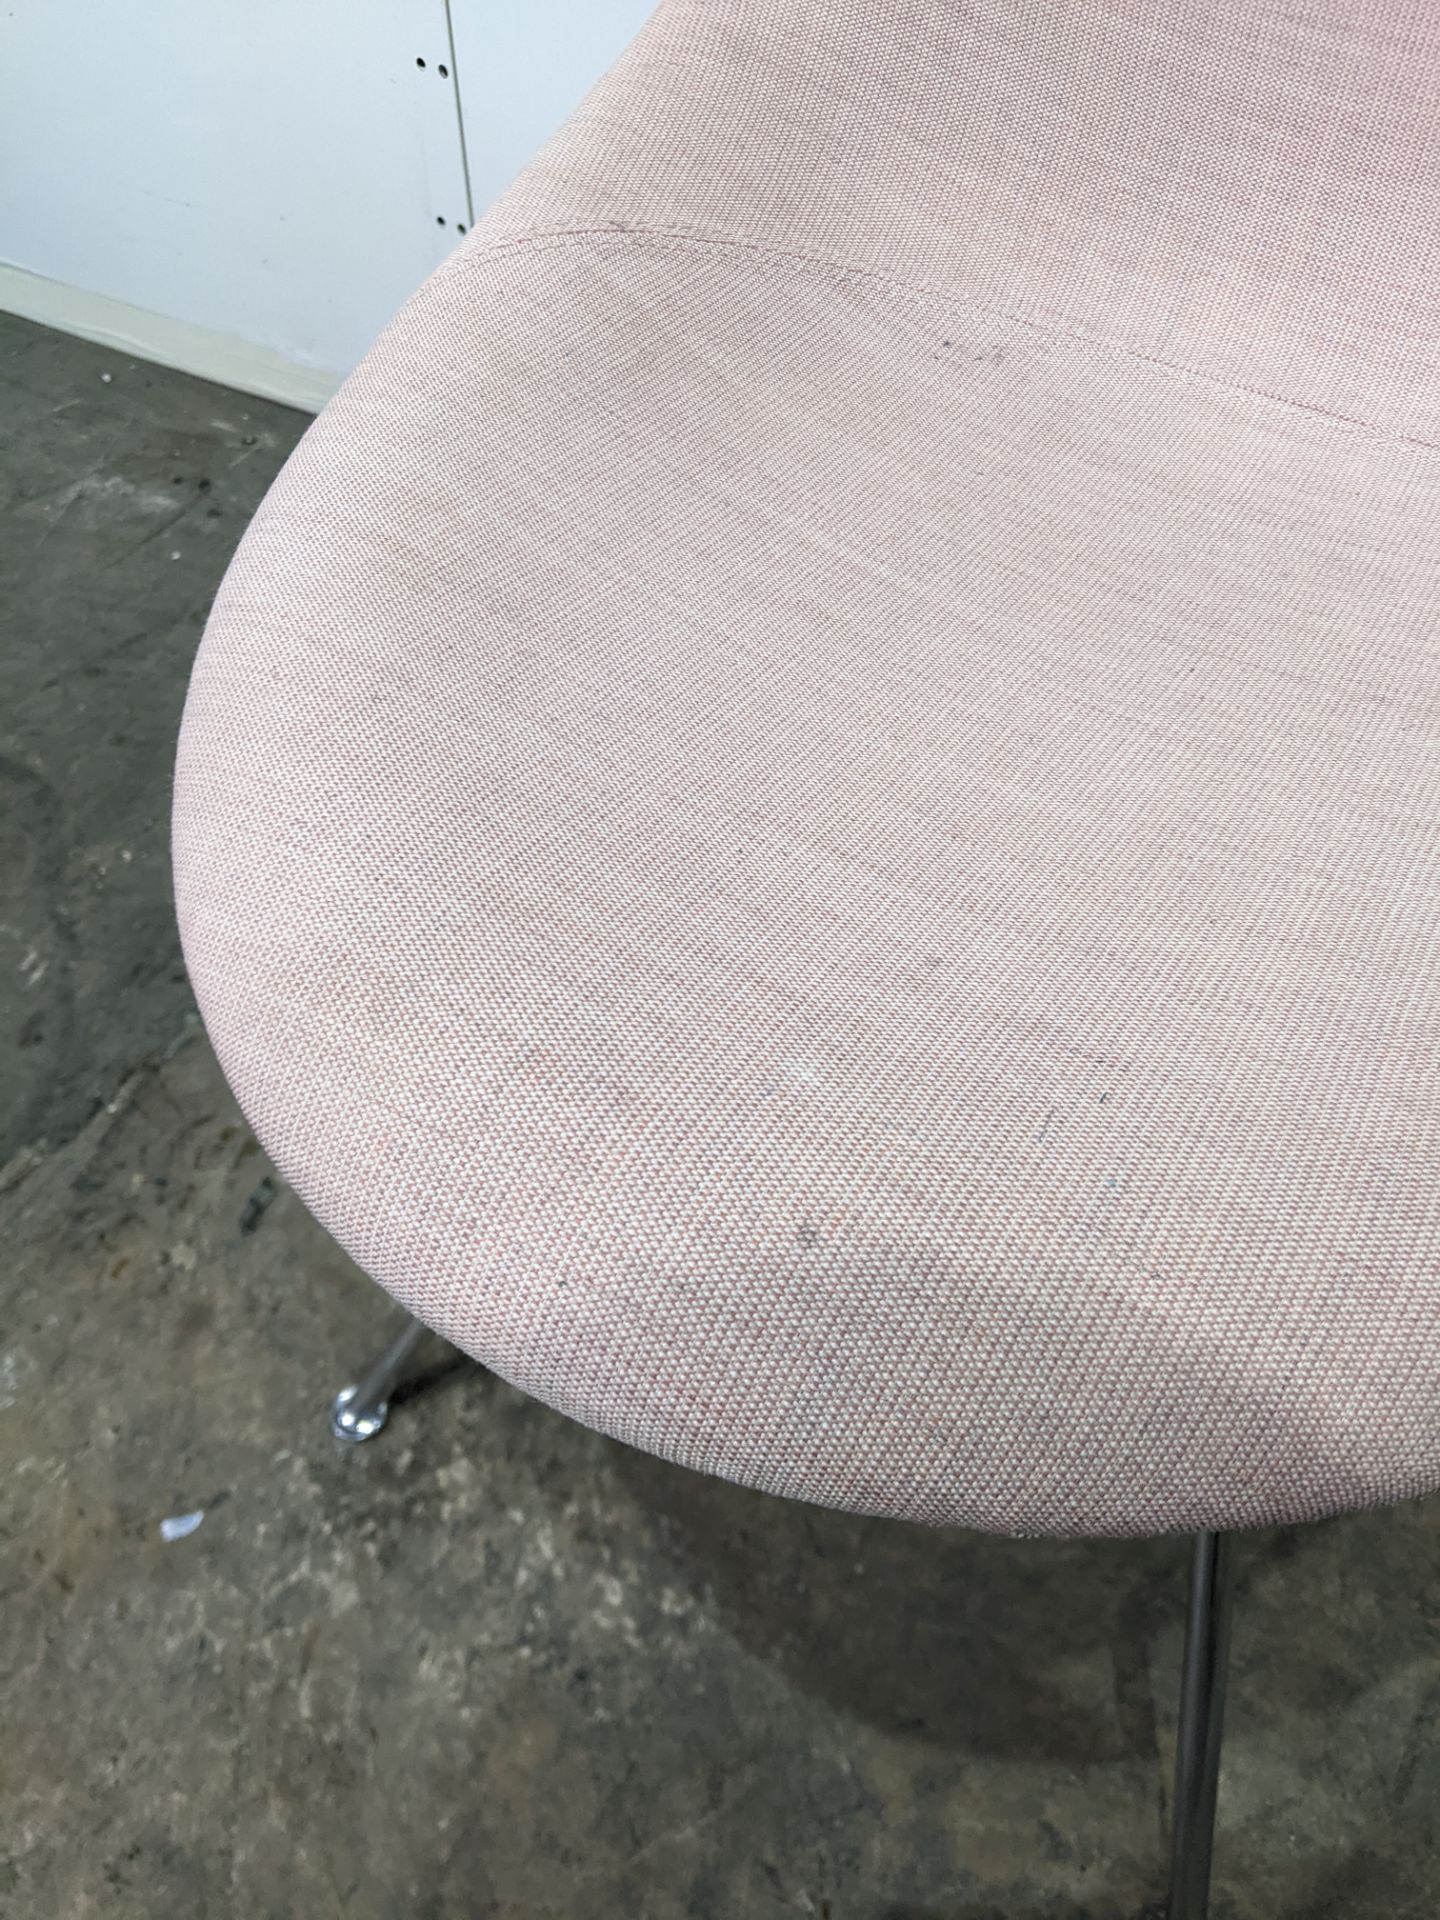 Fritz Hansen DROP Chair | Colour: Pale Pink| New Price - £925 - Image 4 of 6